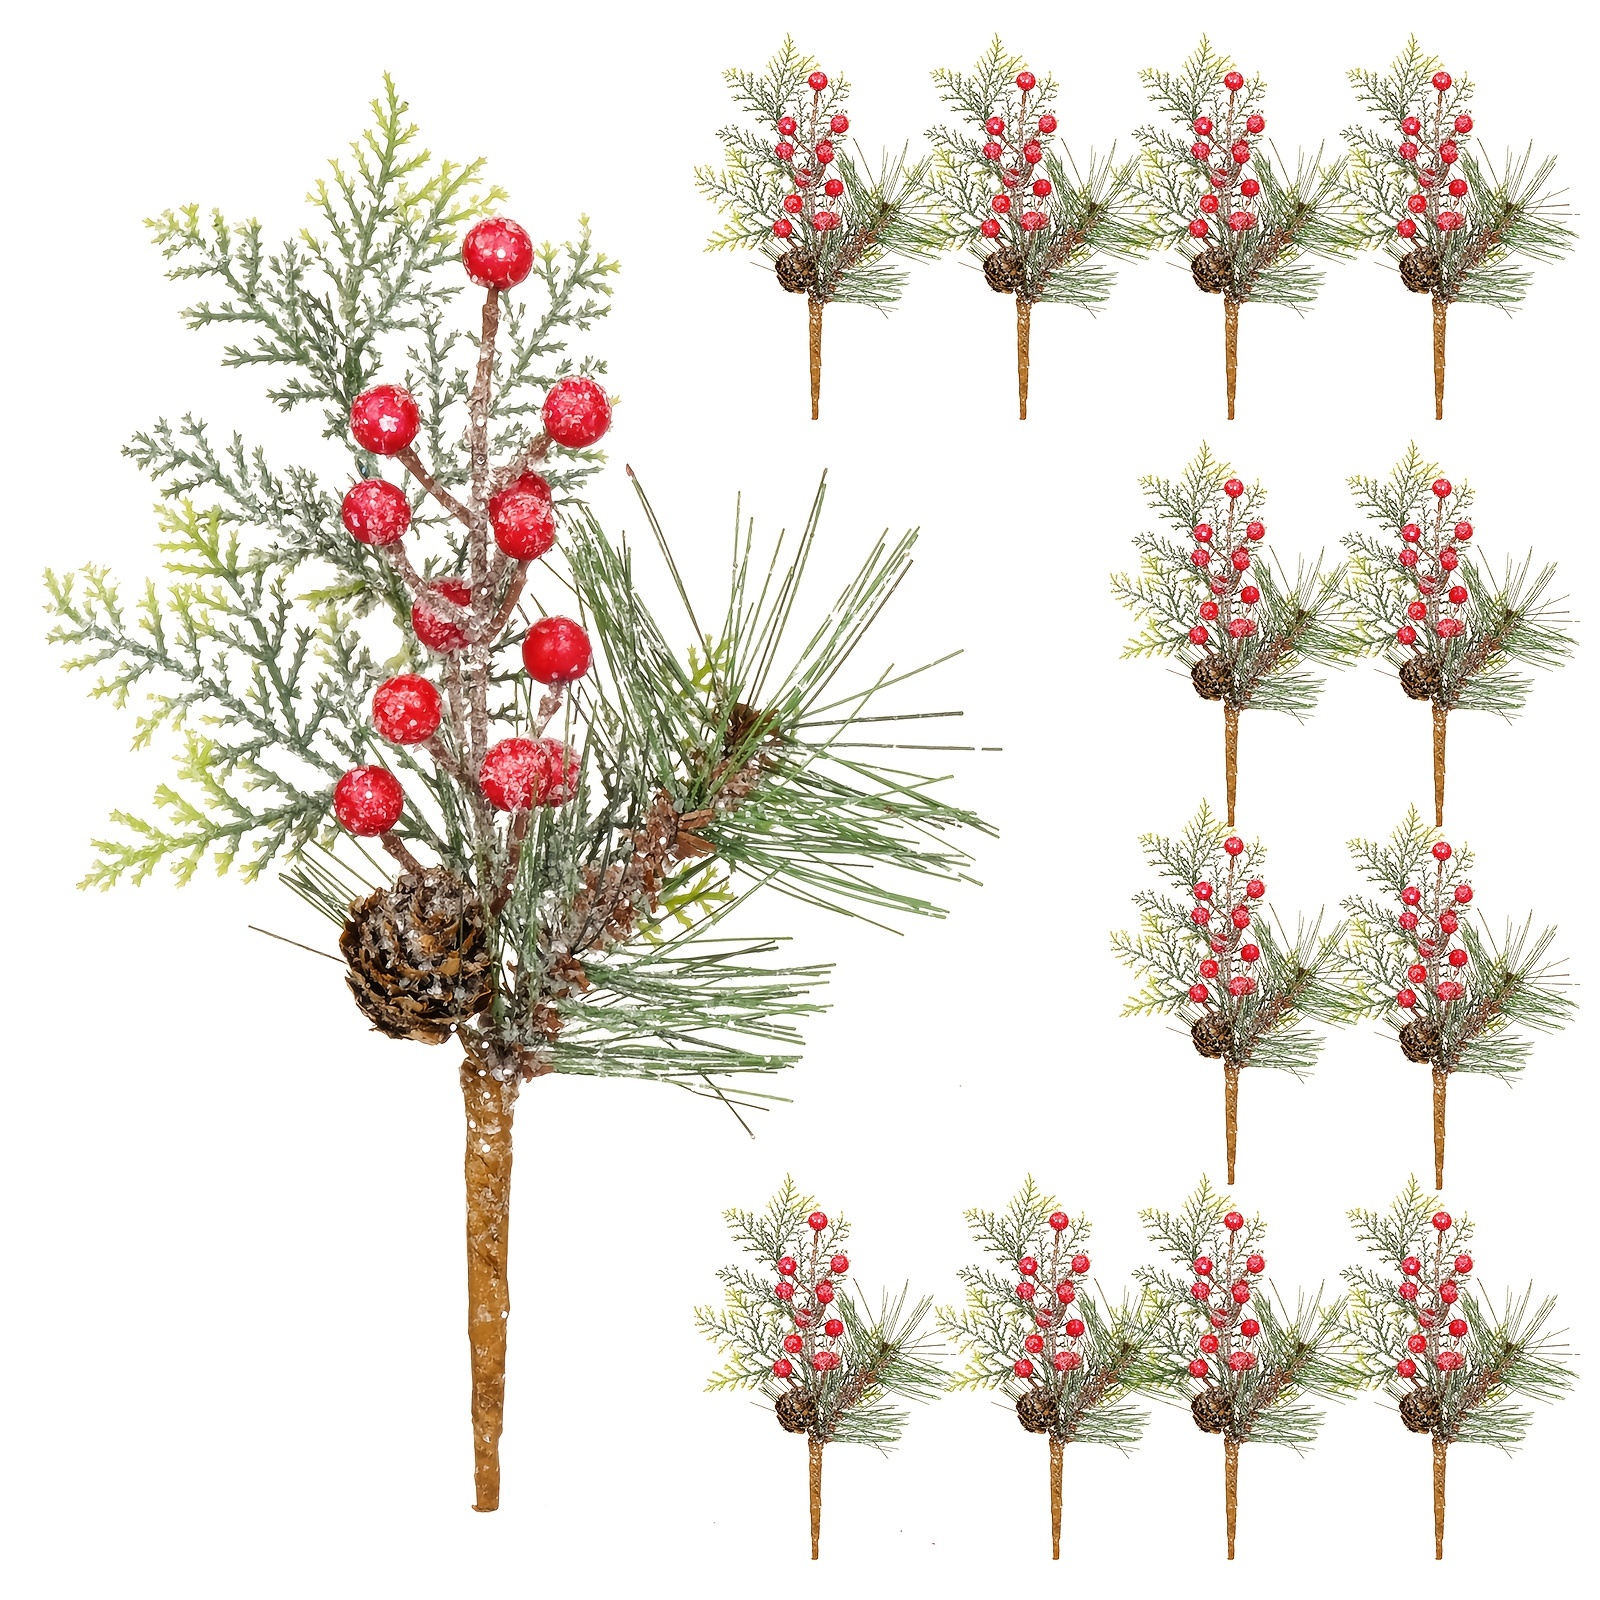 Red Berries on a Christmas Tree with a Pine Cone are Covered with